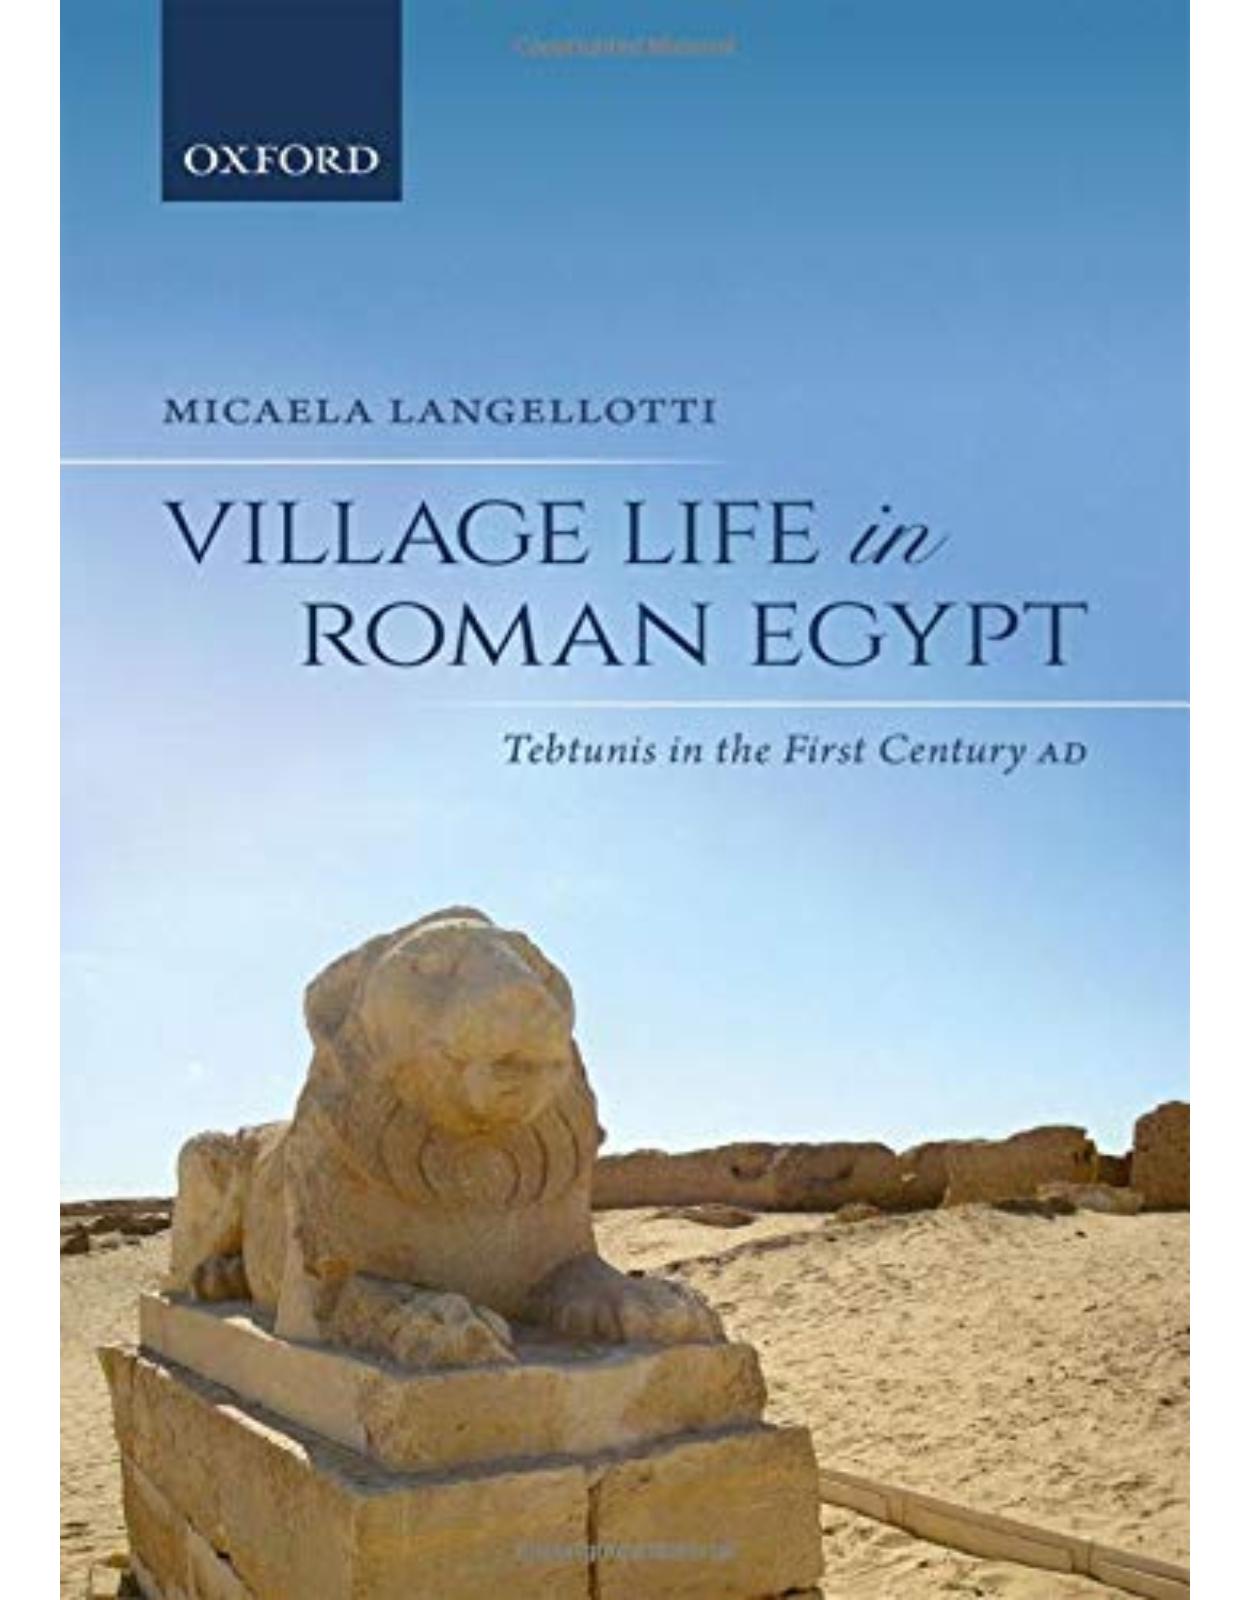 Village Life in Roman Egypt: Tebtunis in the First Century AD